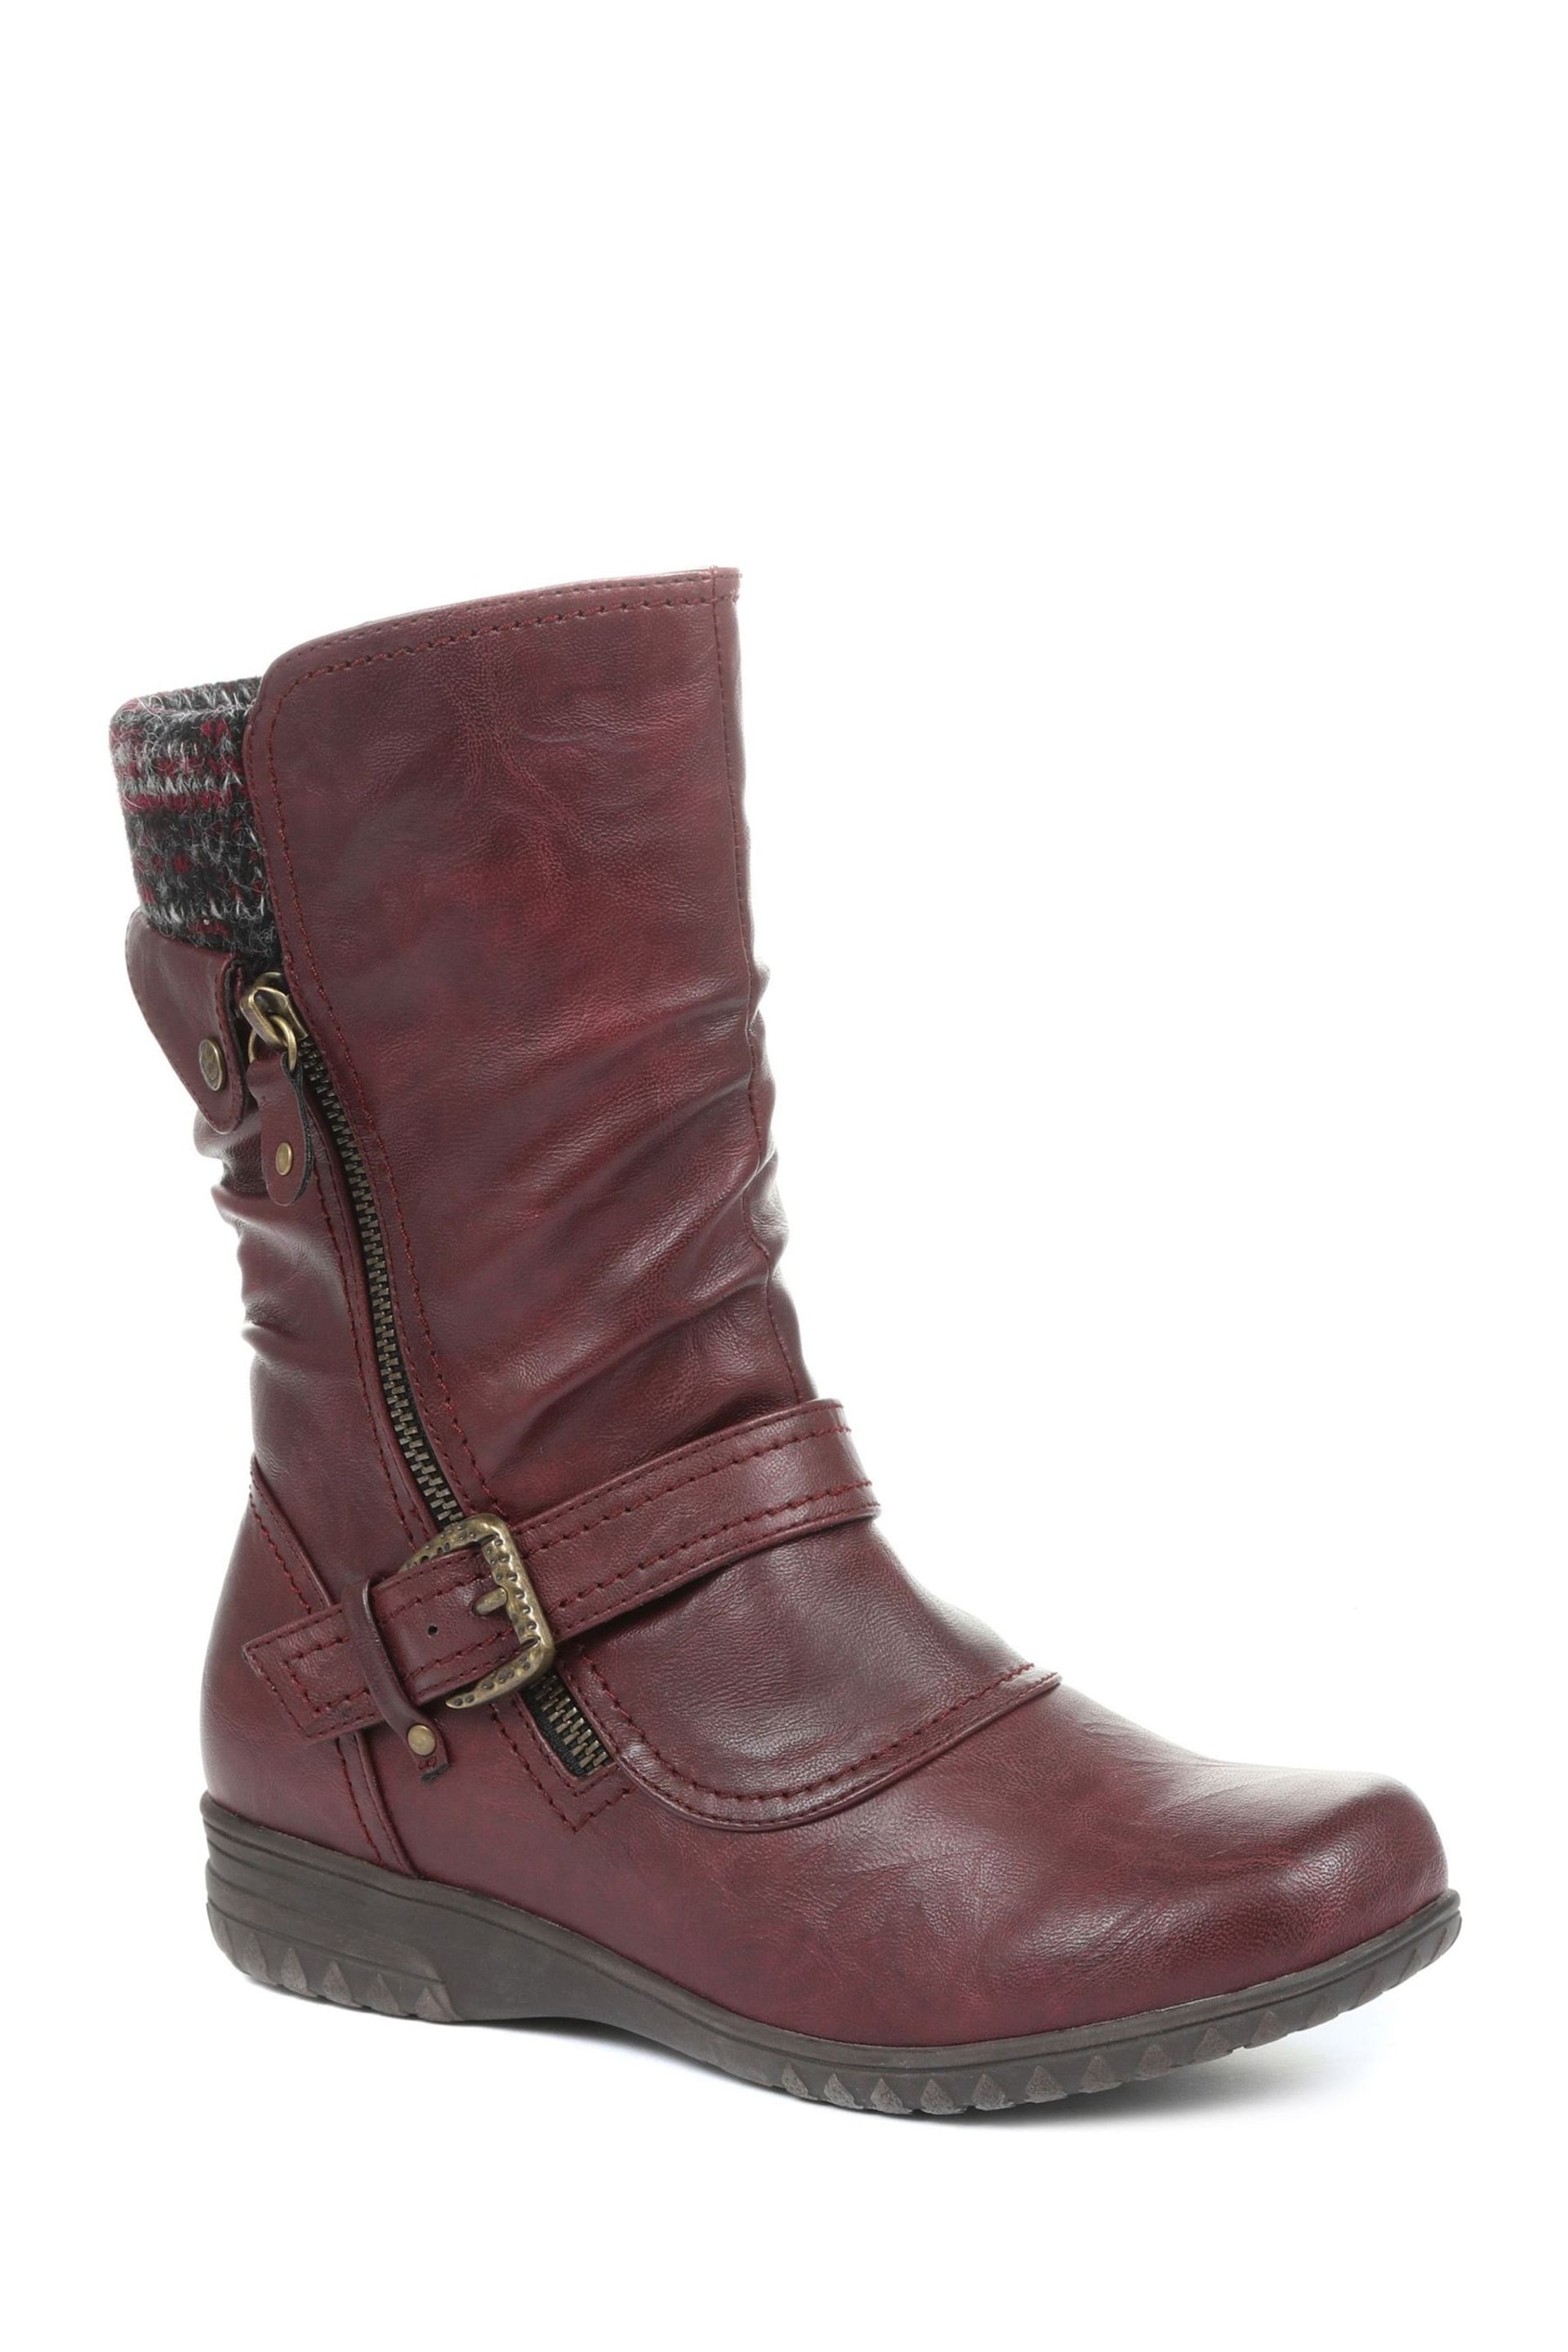 Pavers Ladies Calf Boots - Image 3 of 5